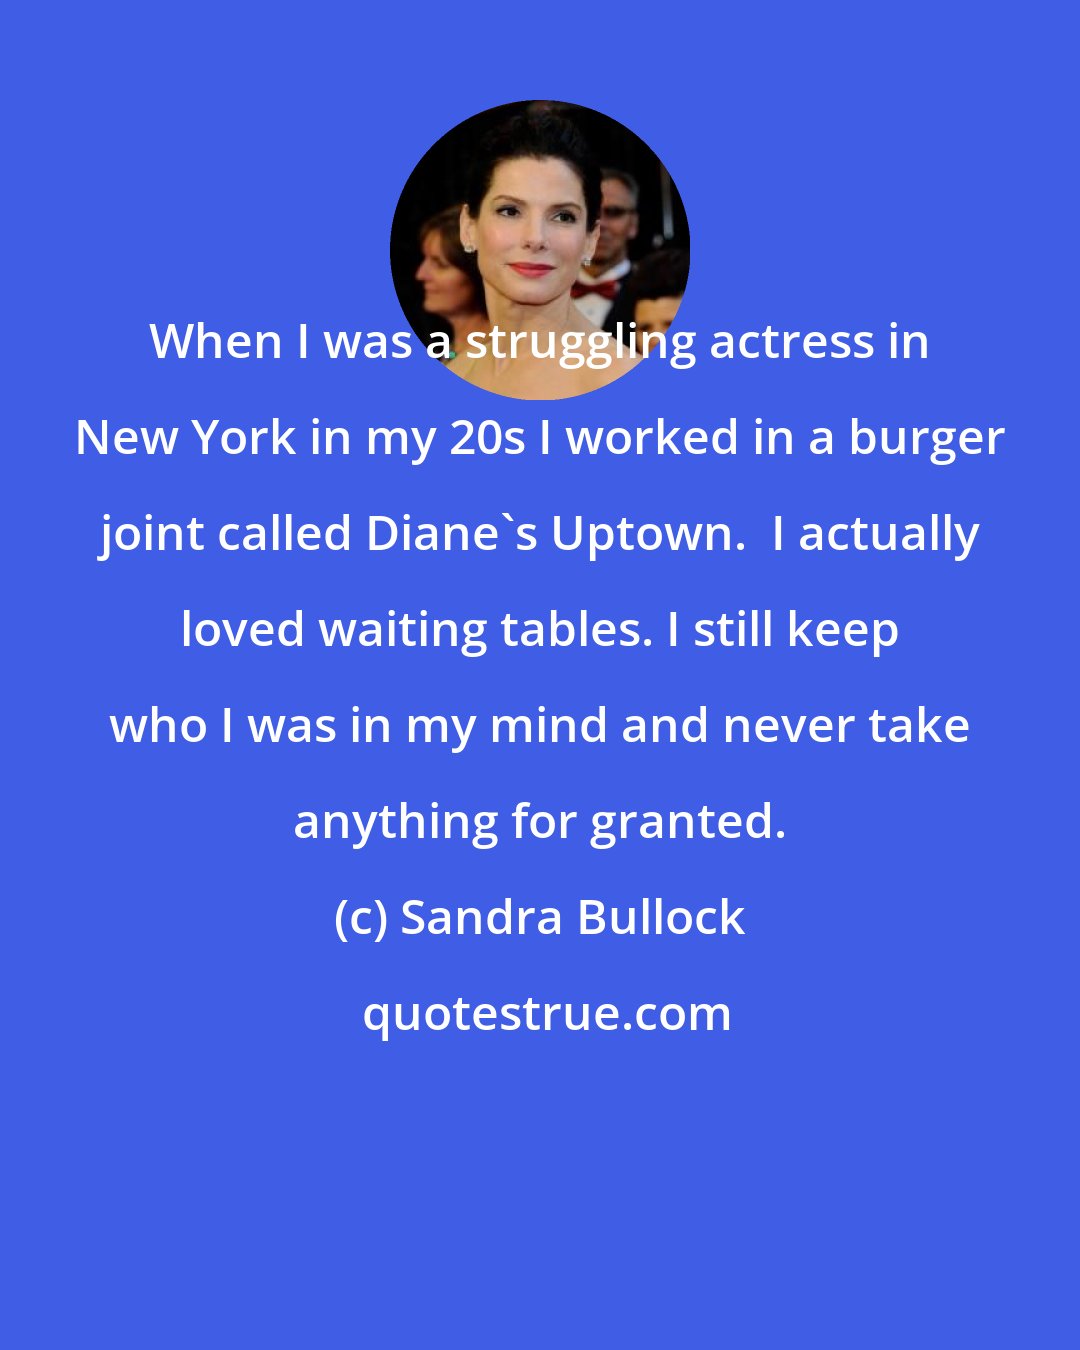 Sandra Bullock: When I was a struggling actress in New York in my 20s I worked in a burger joint called Diane's Uptown.  I actually loved waiting tables. I still keep who I was in my mind and never take anything for granted.